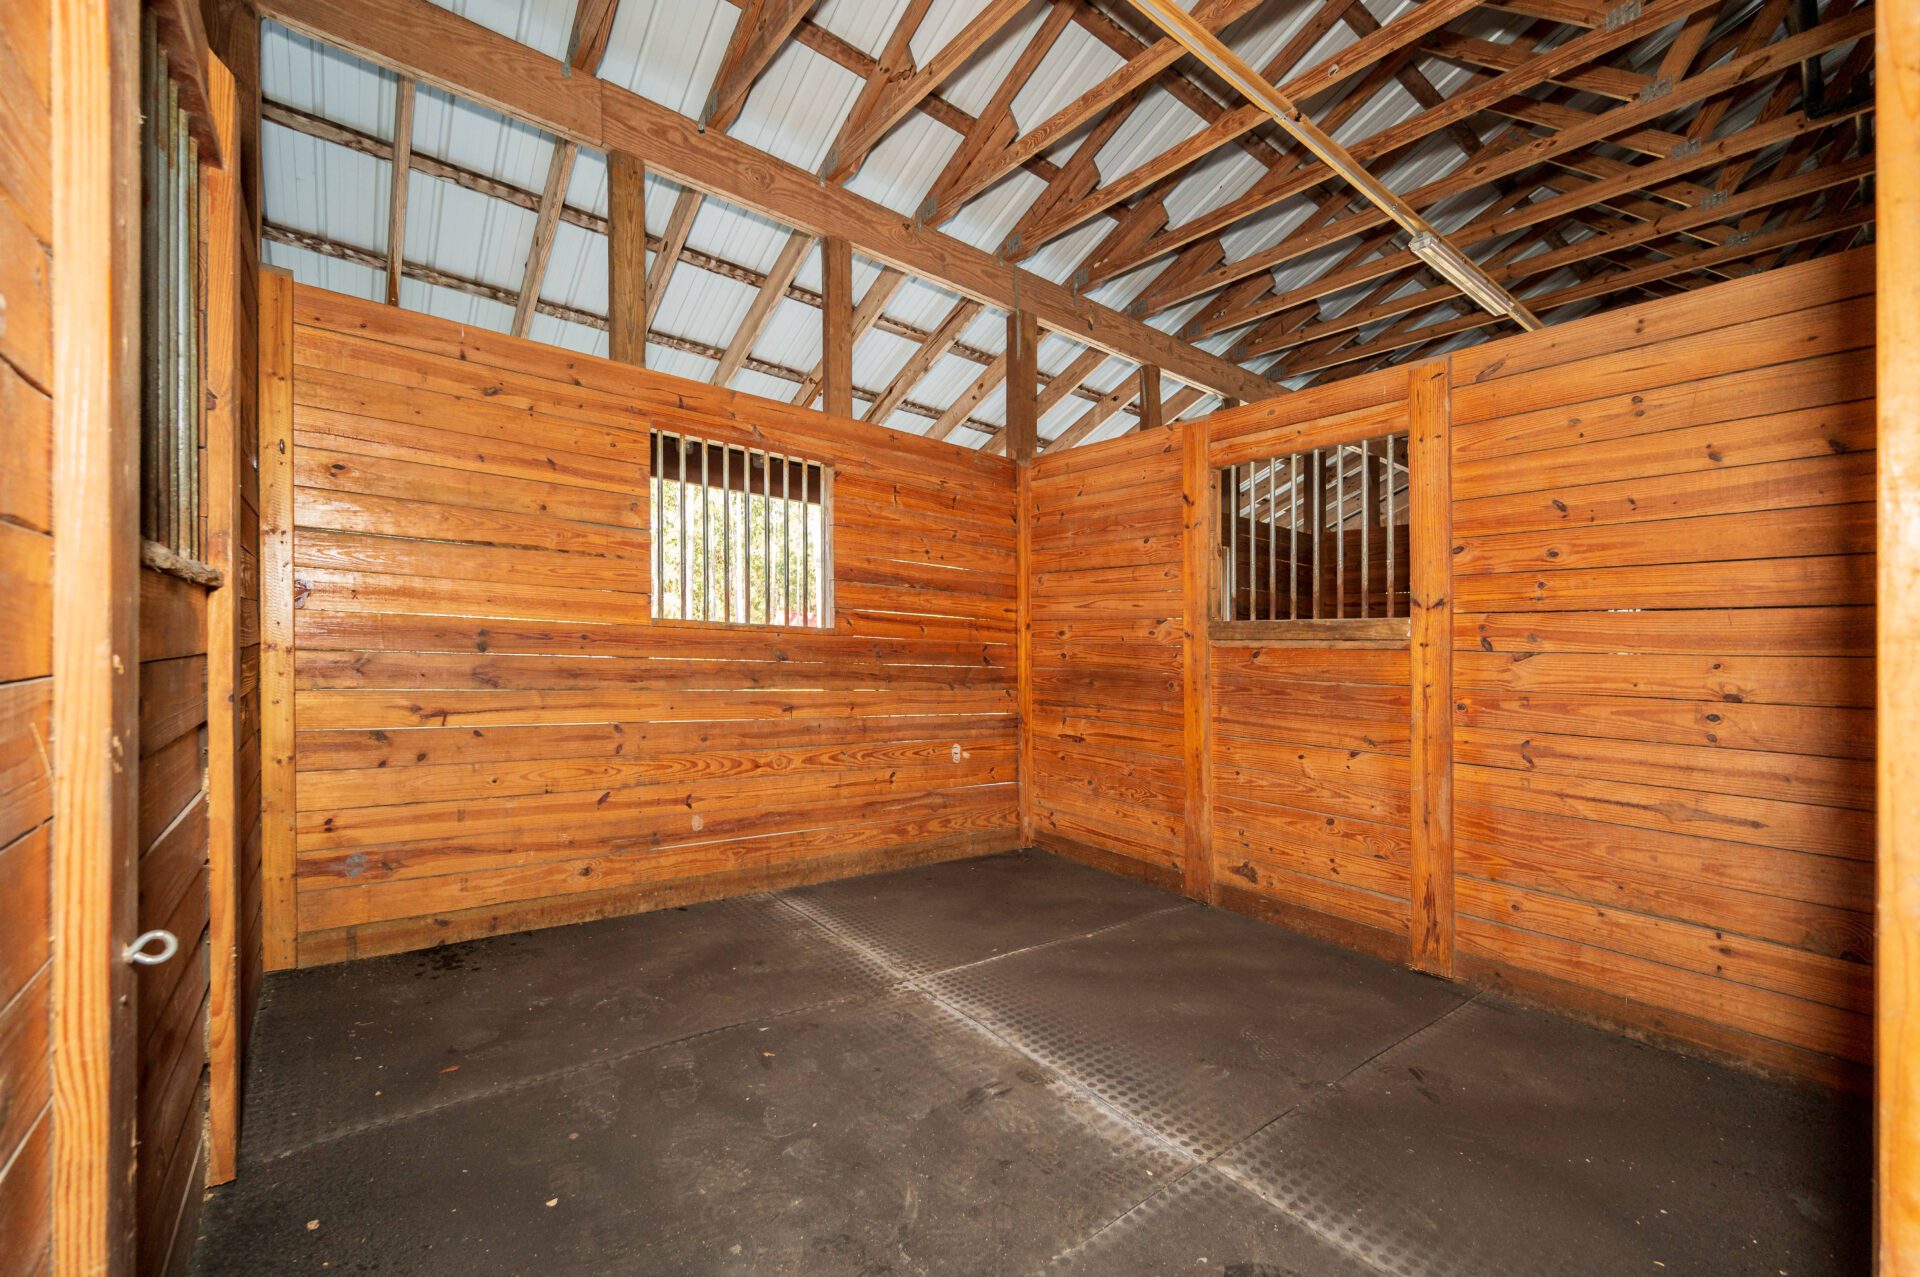 rent a horse stall on vacation